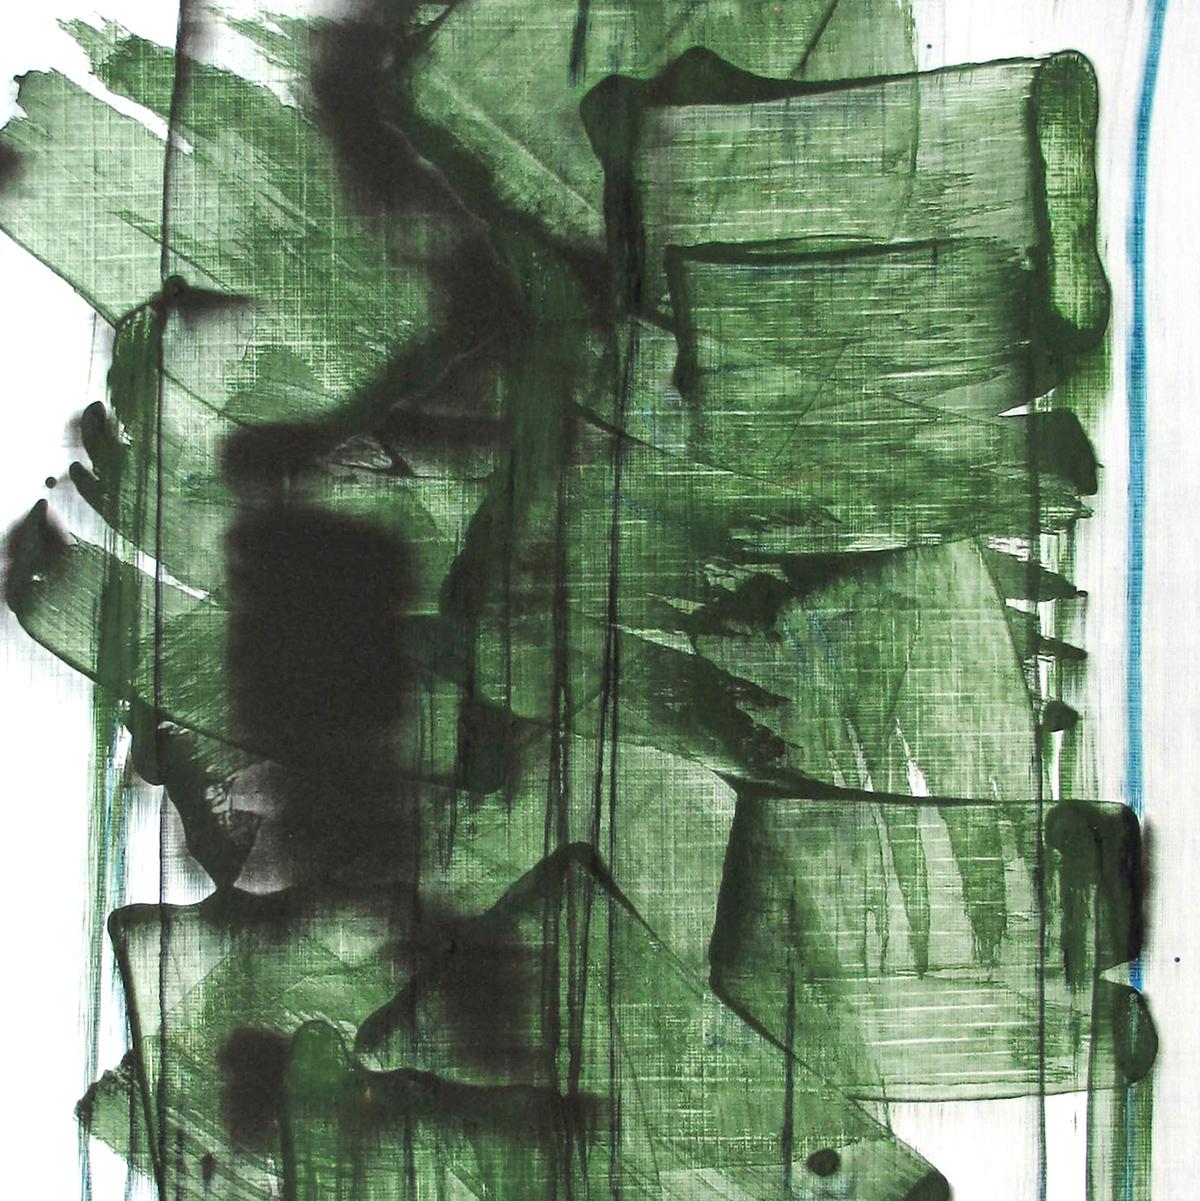 Mad green 2 (Abstract Painting)
Acrylic and pigments on paper — Unframed.

Emma Godebska is a French abstract artist living in Nimes, France.

Her use of natural pigments, reflective of nature itself, is in dialogue with diluted acrylic paint and